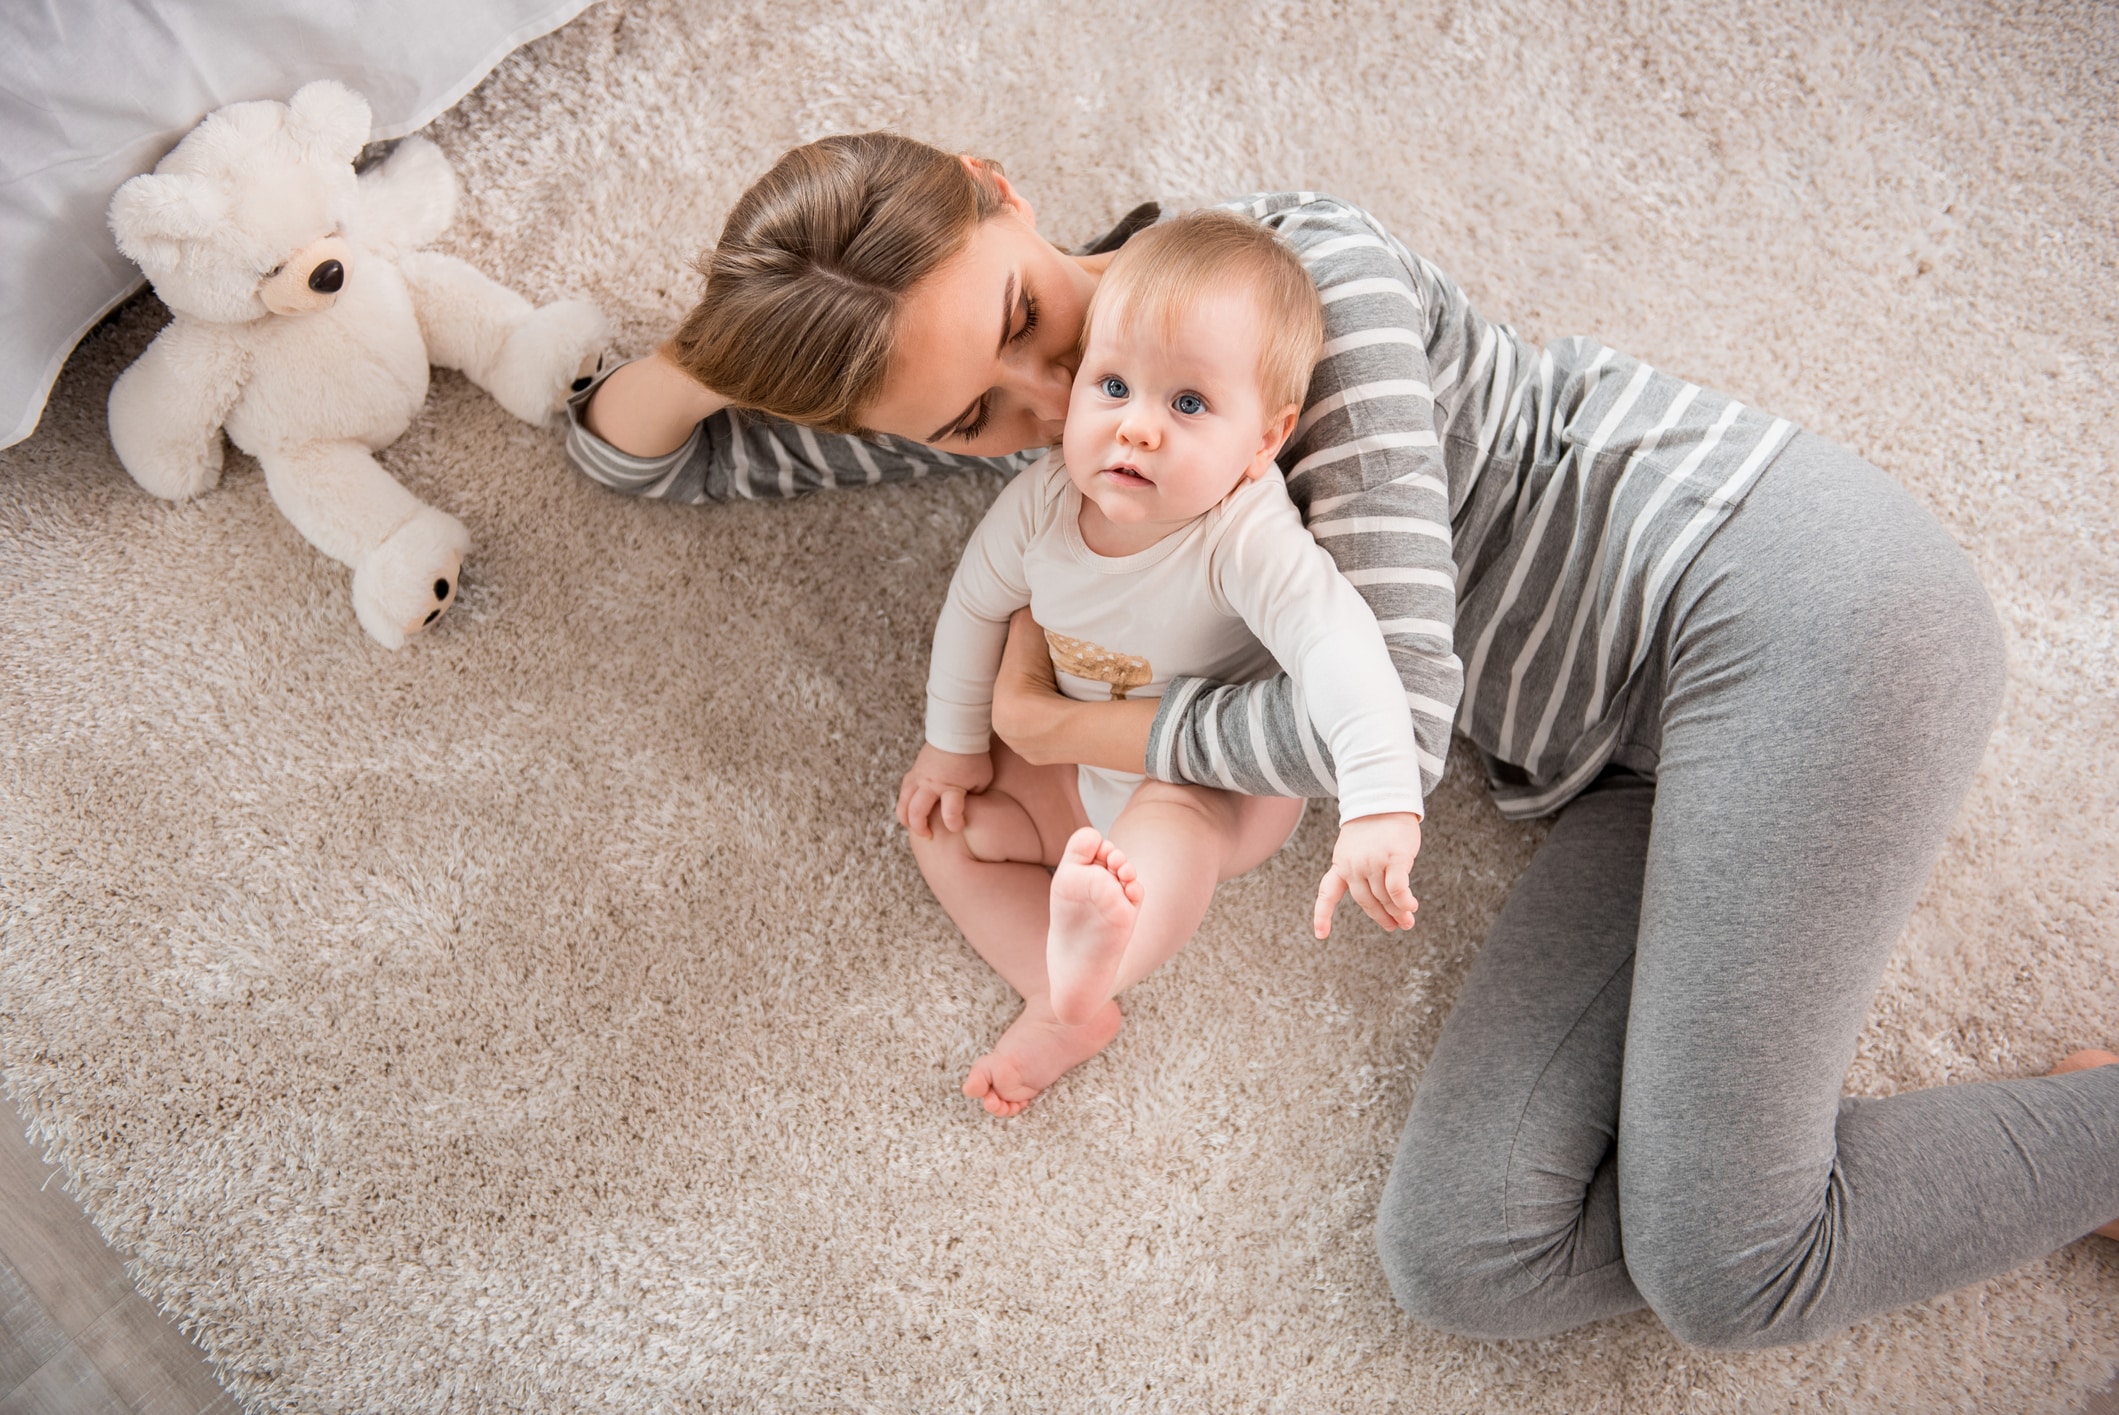 Baby Concussion Signs And What To Do, Baby Fell On Head On Hardwood Floor